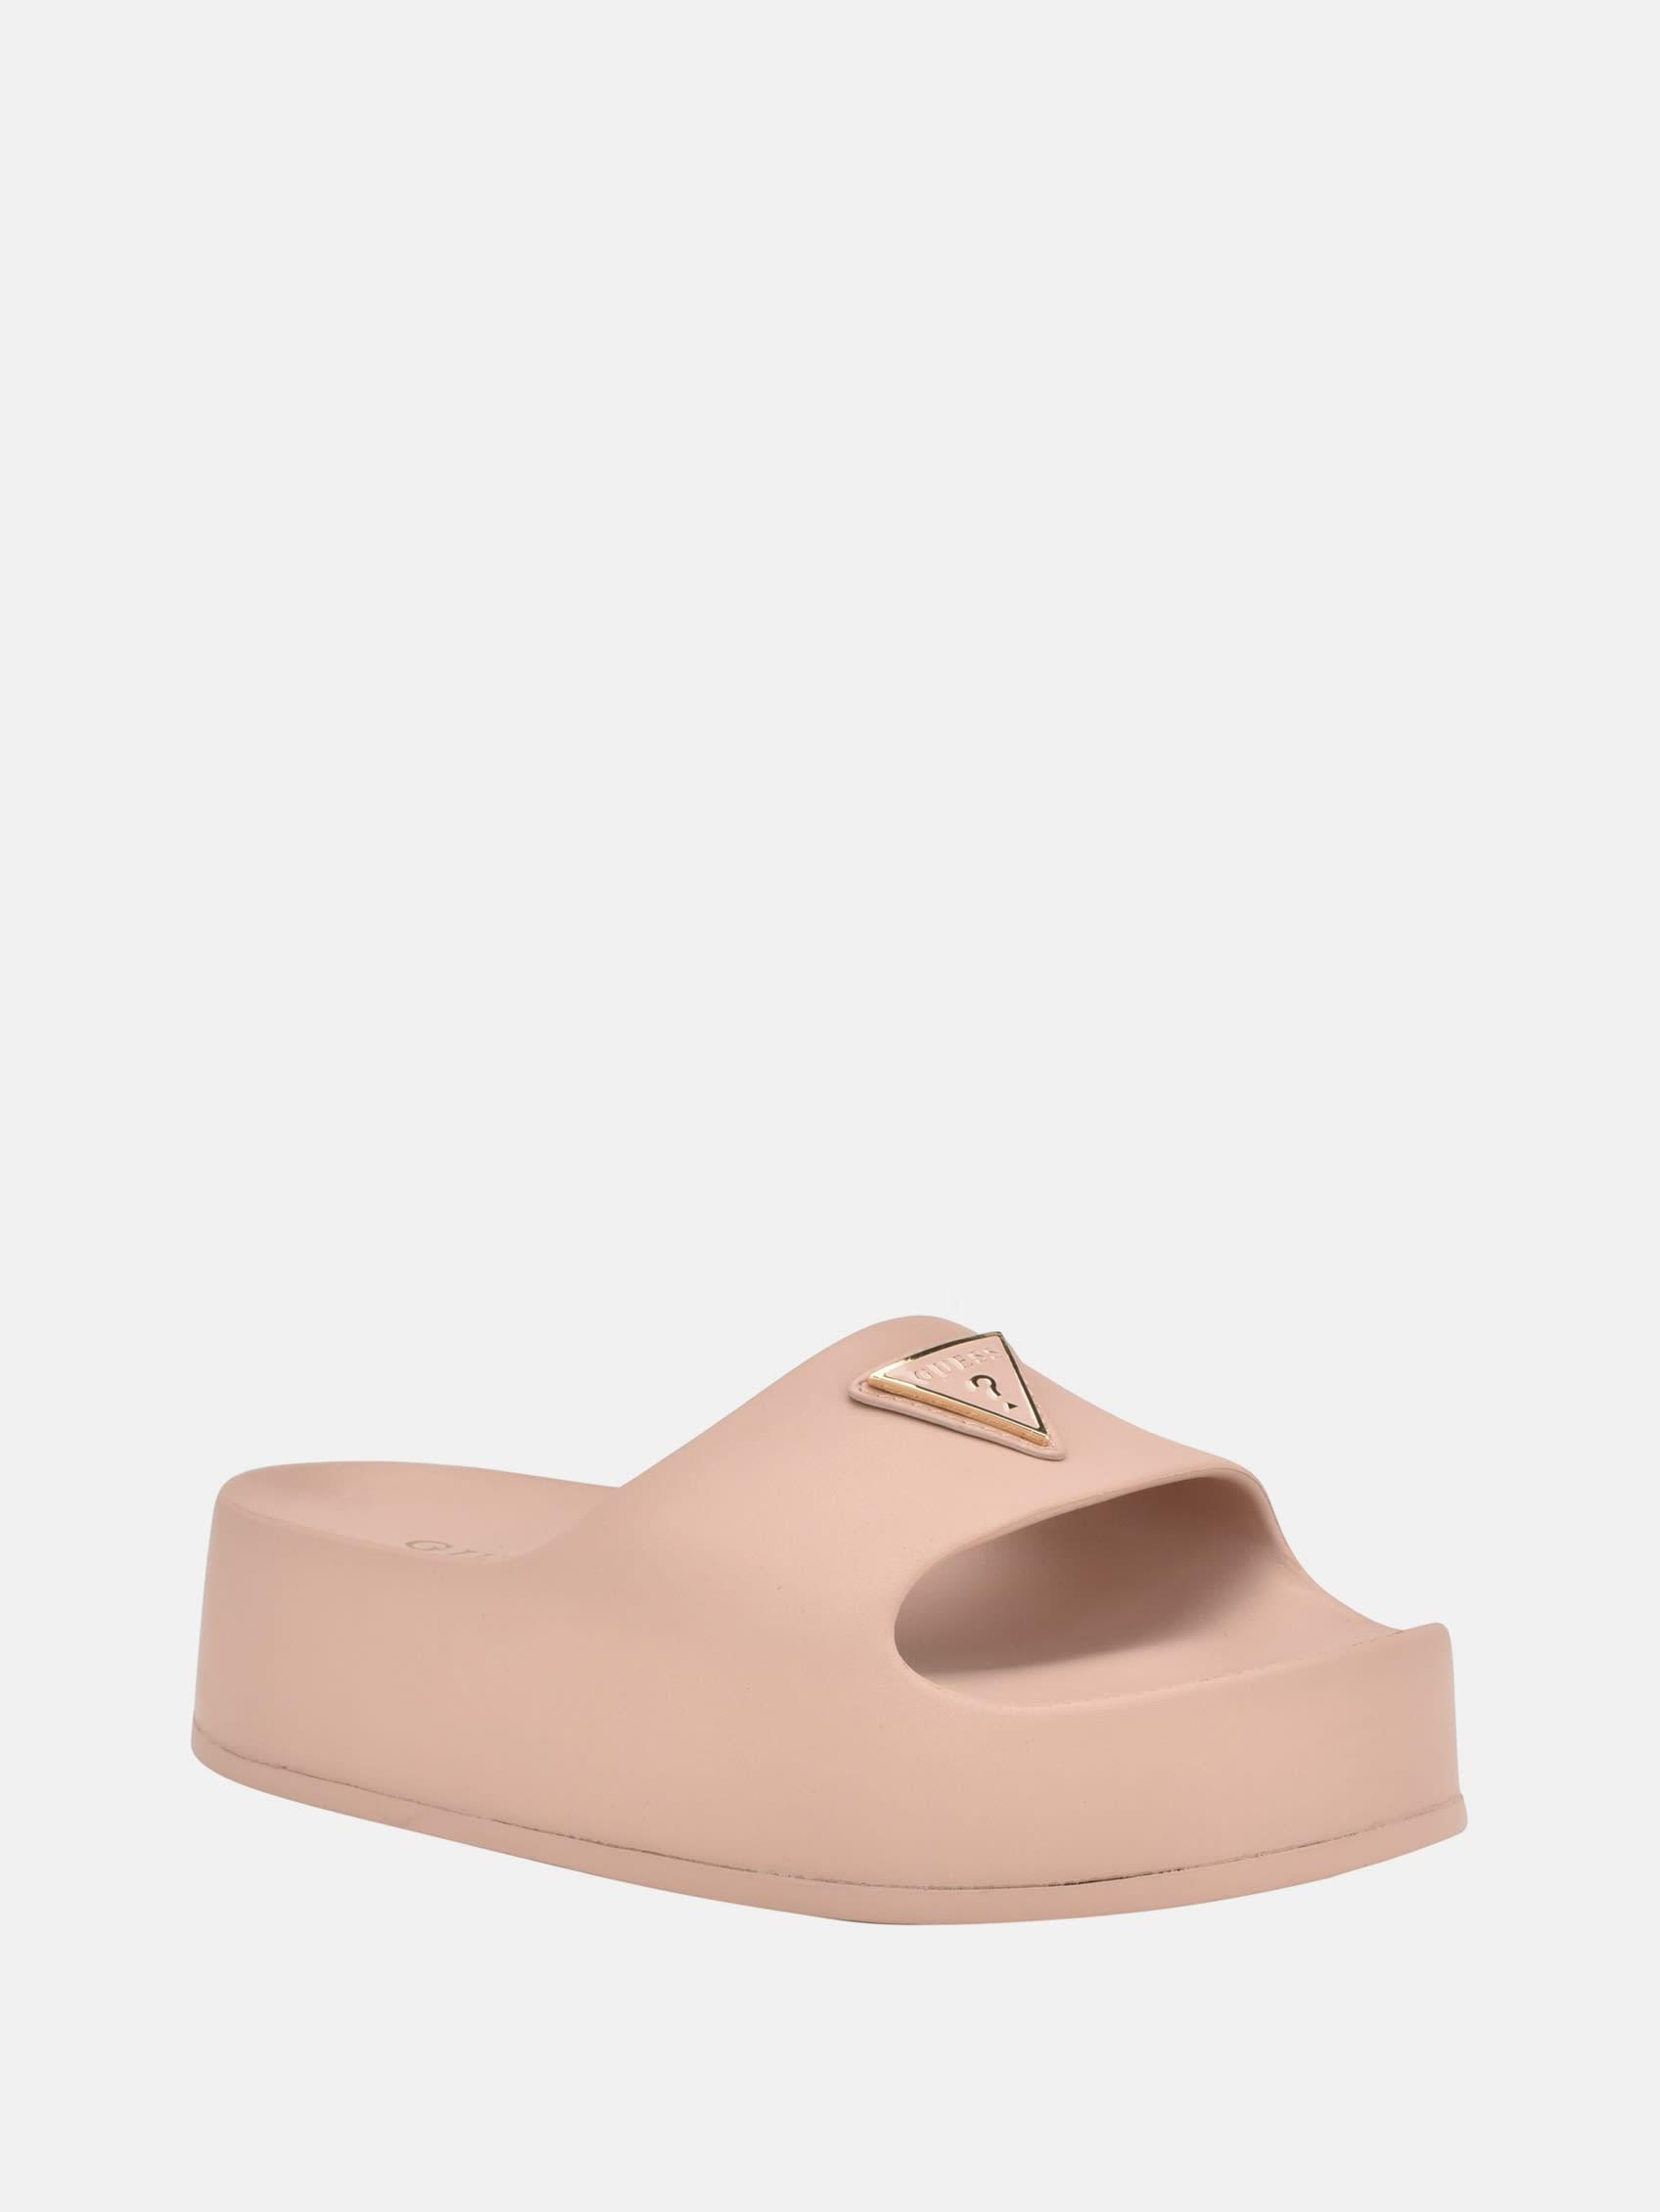 Guess Factory Plats Platform Pool Slides in Pink | Lyst